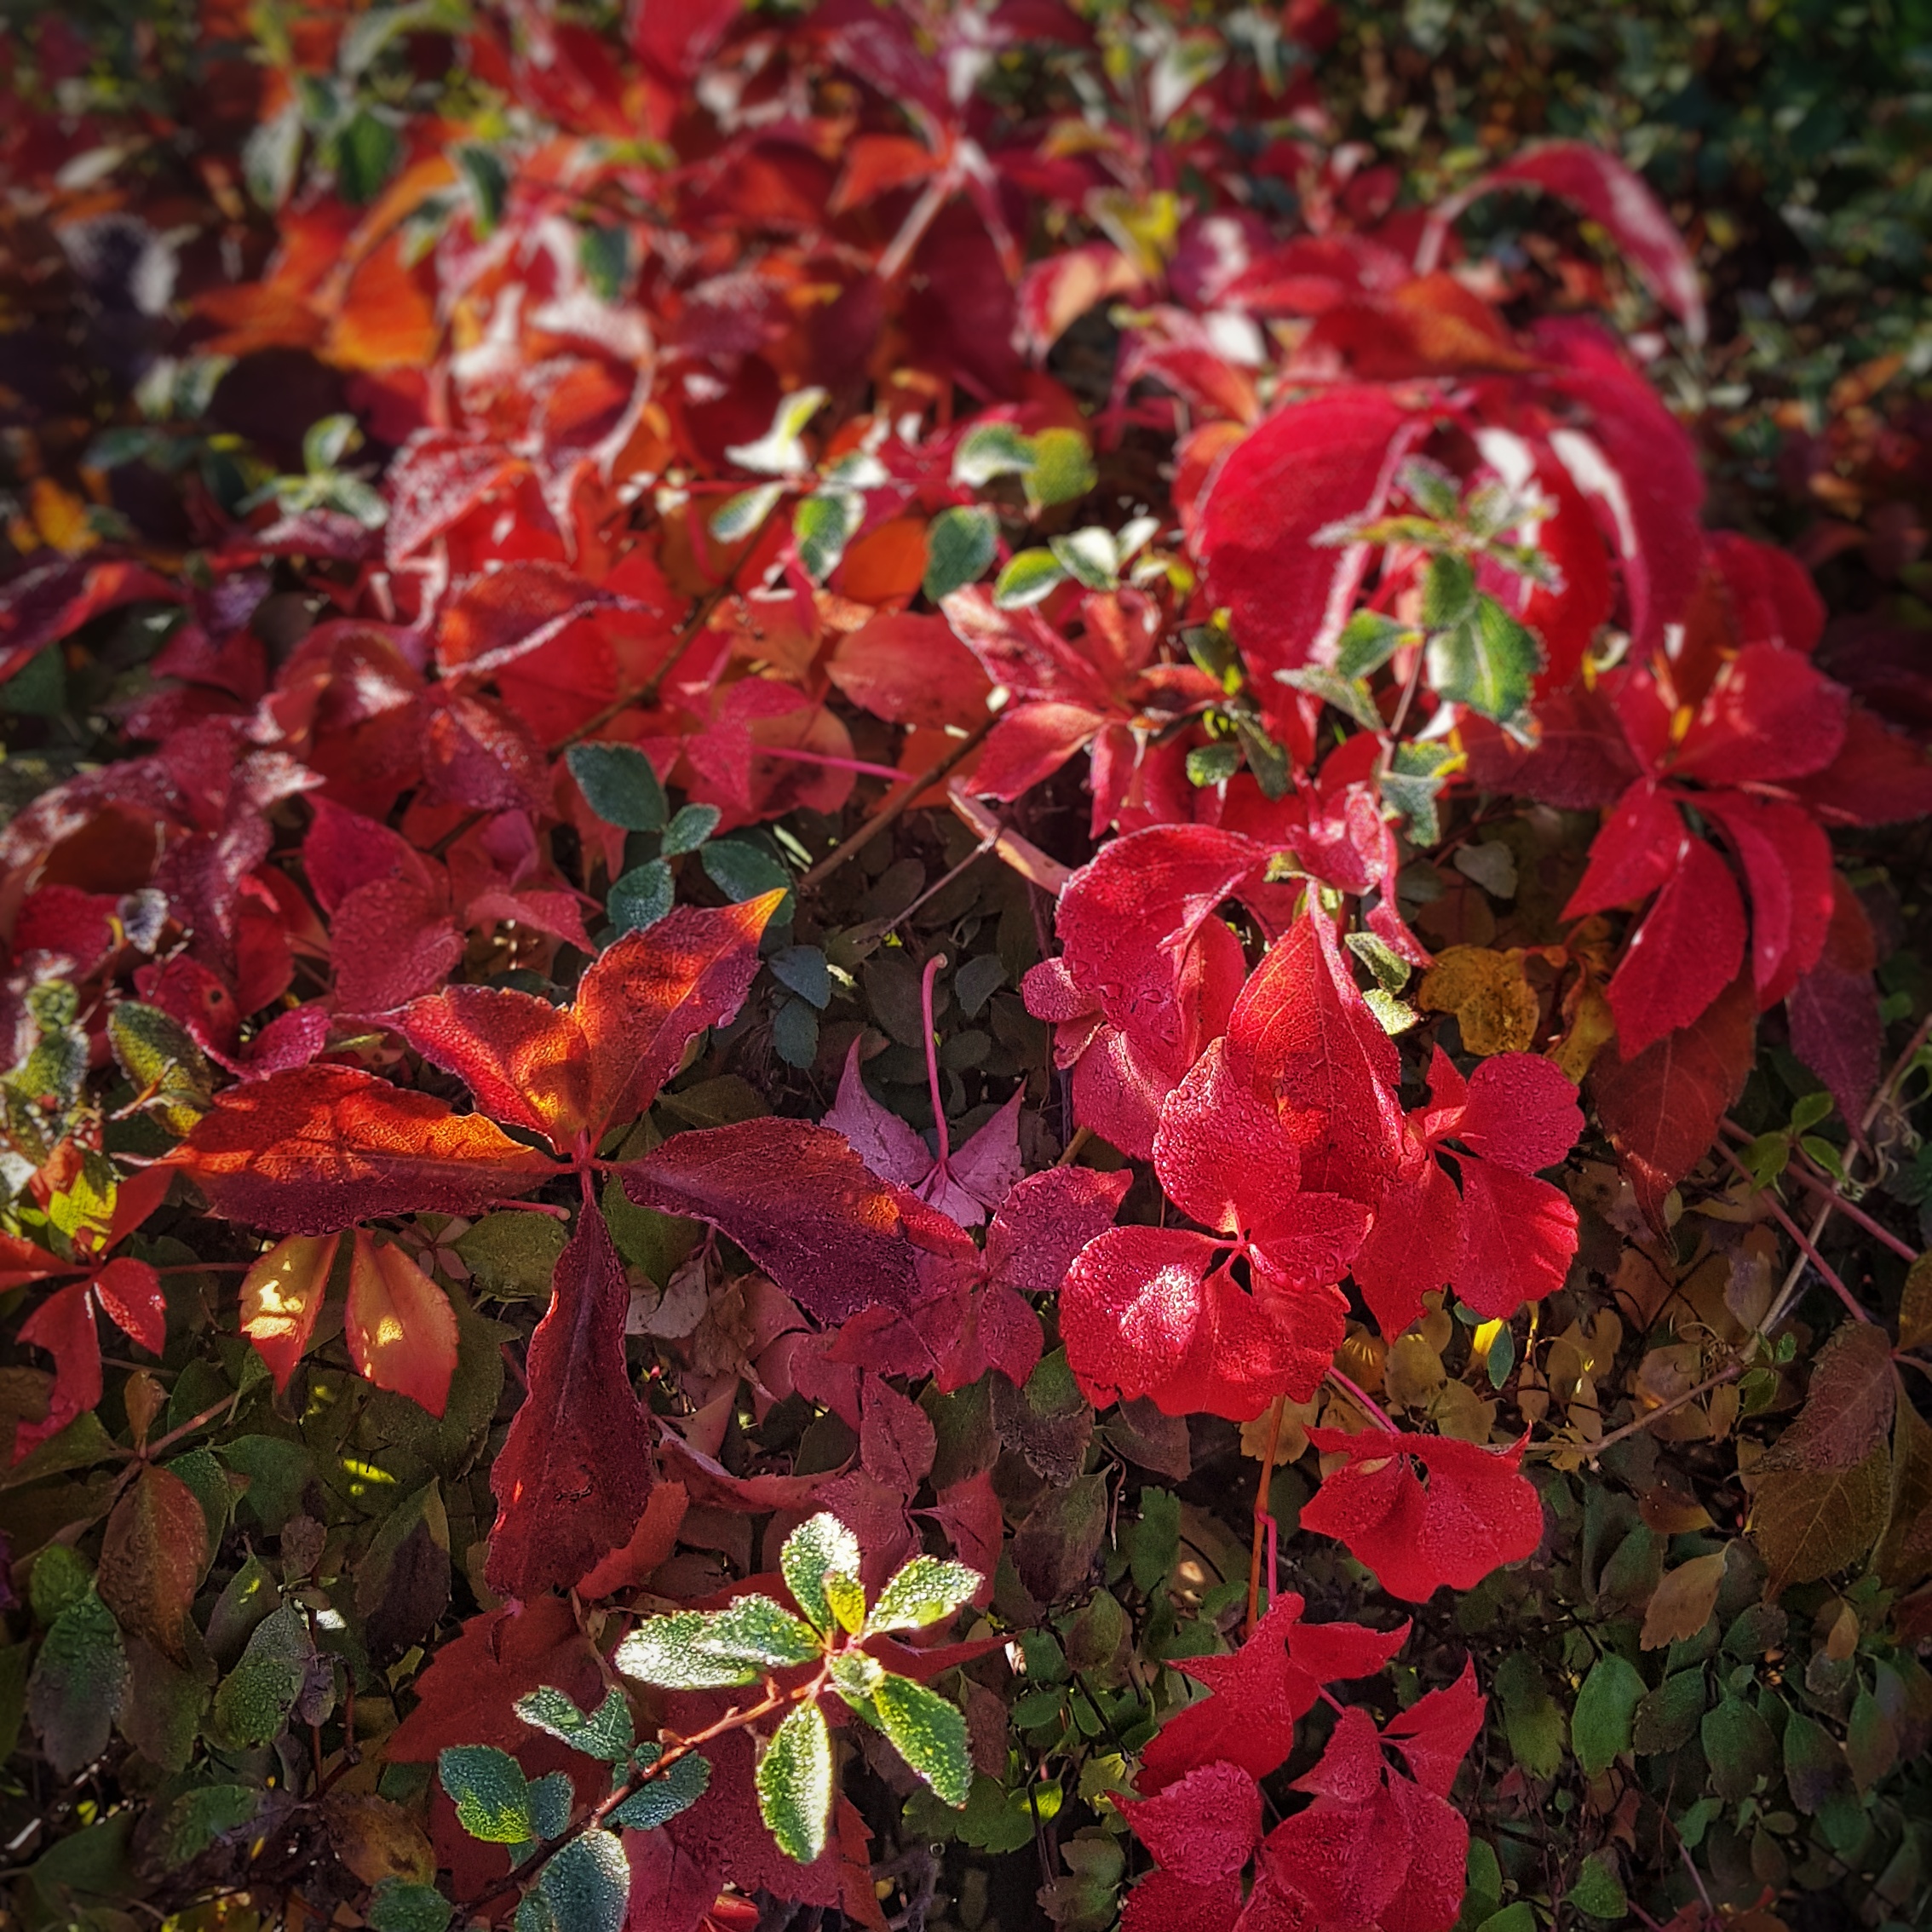 Day 290 - October 17: Red